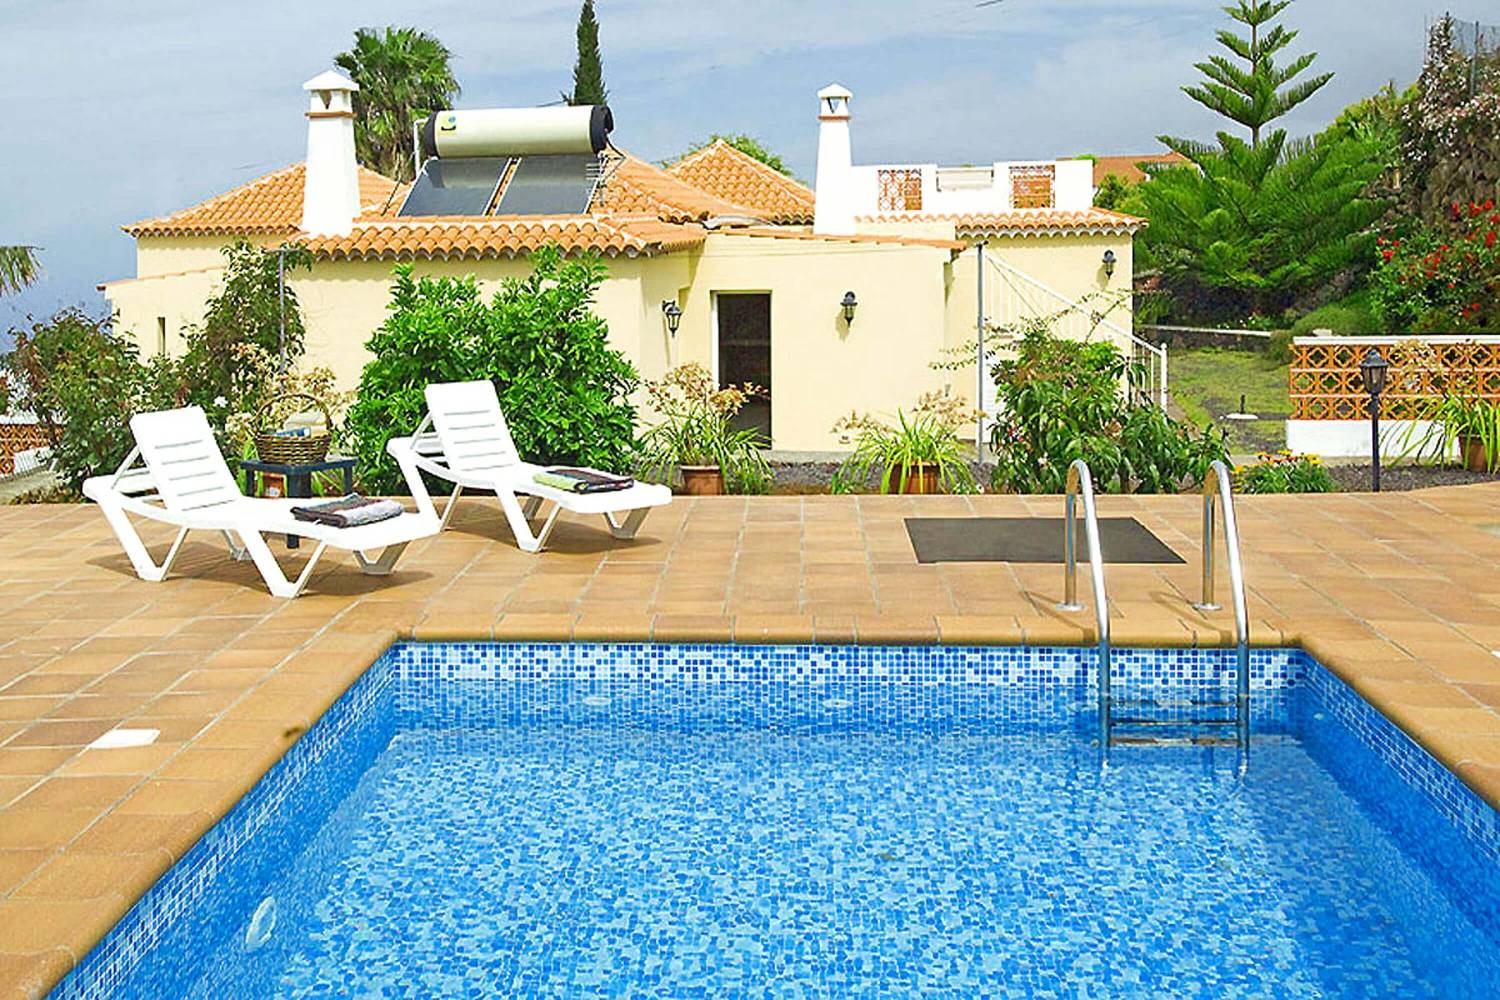 Holiday house with magnificent terrace with private pool and sun loungers, perfect for a few days of relaxation in the area of Tijarafe